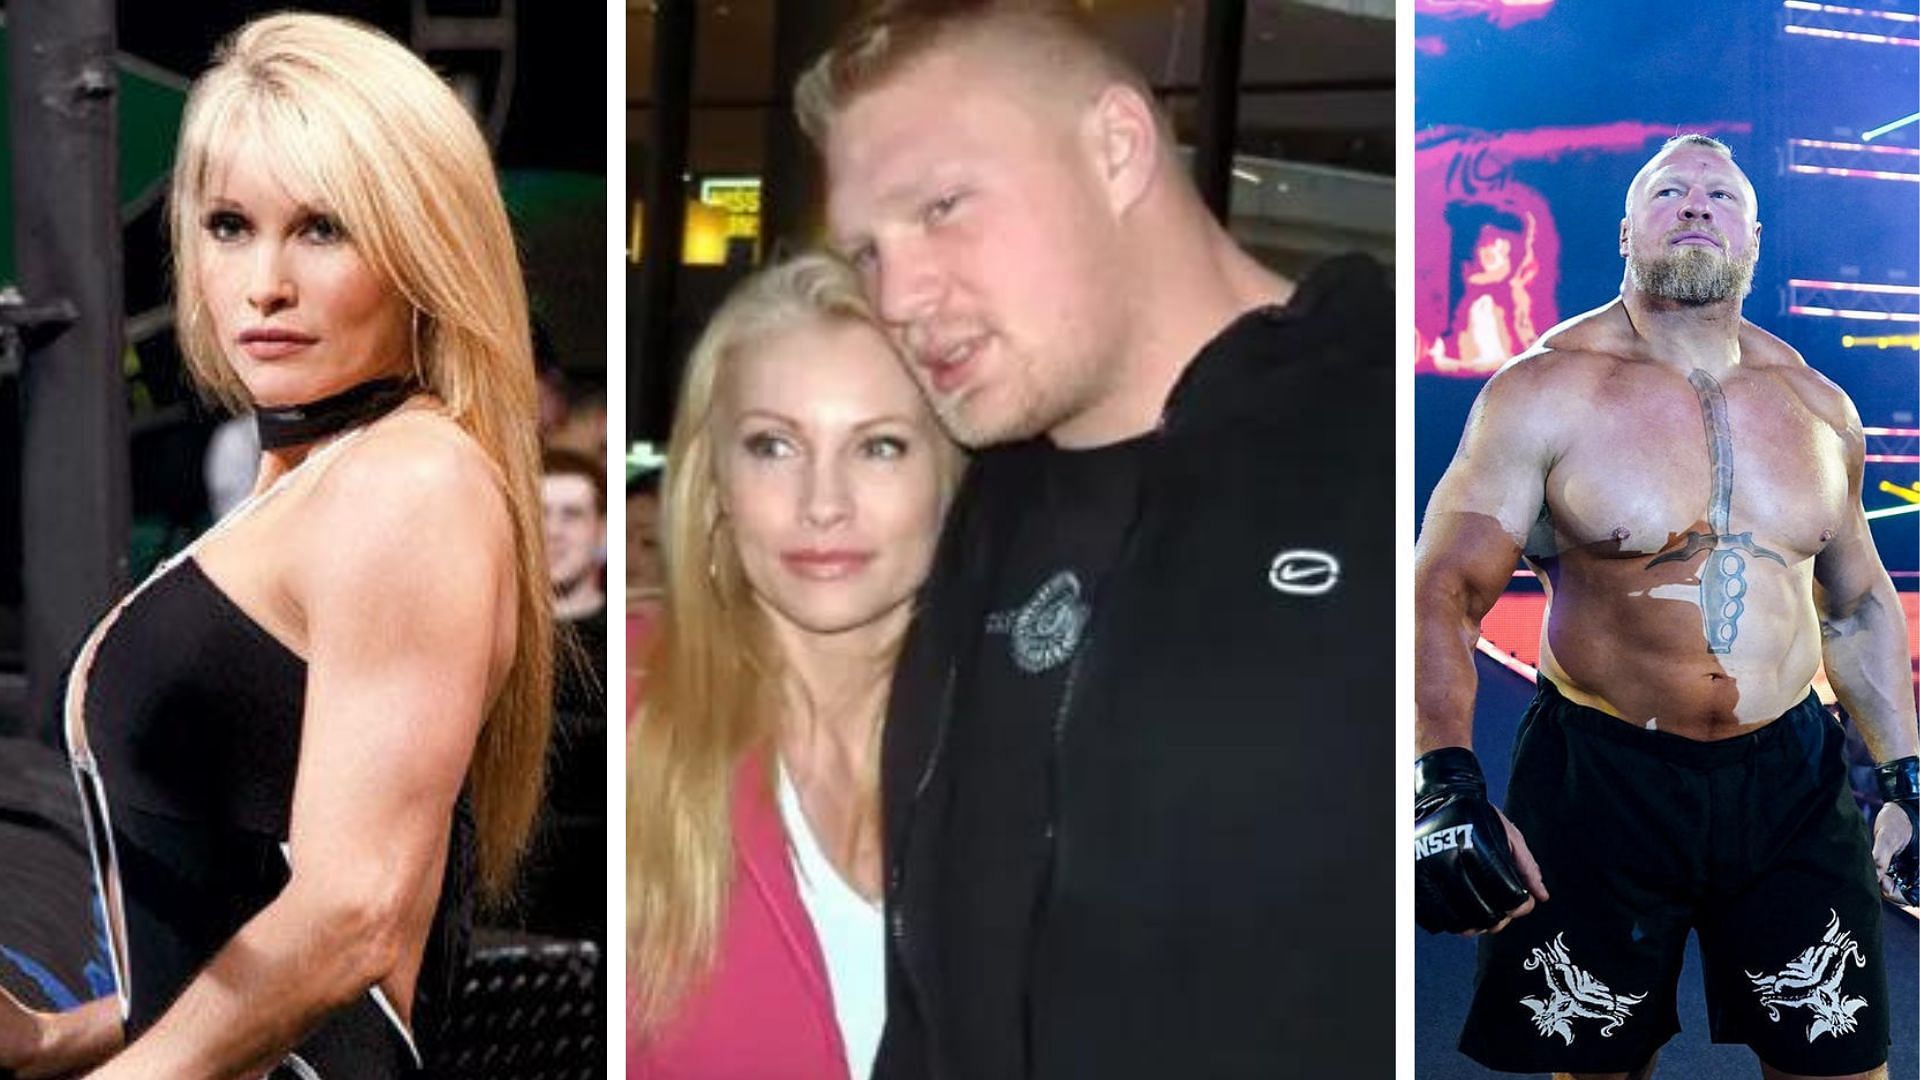 Brock Lesnar and his wife, Sable, began dating in 2003